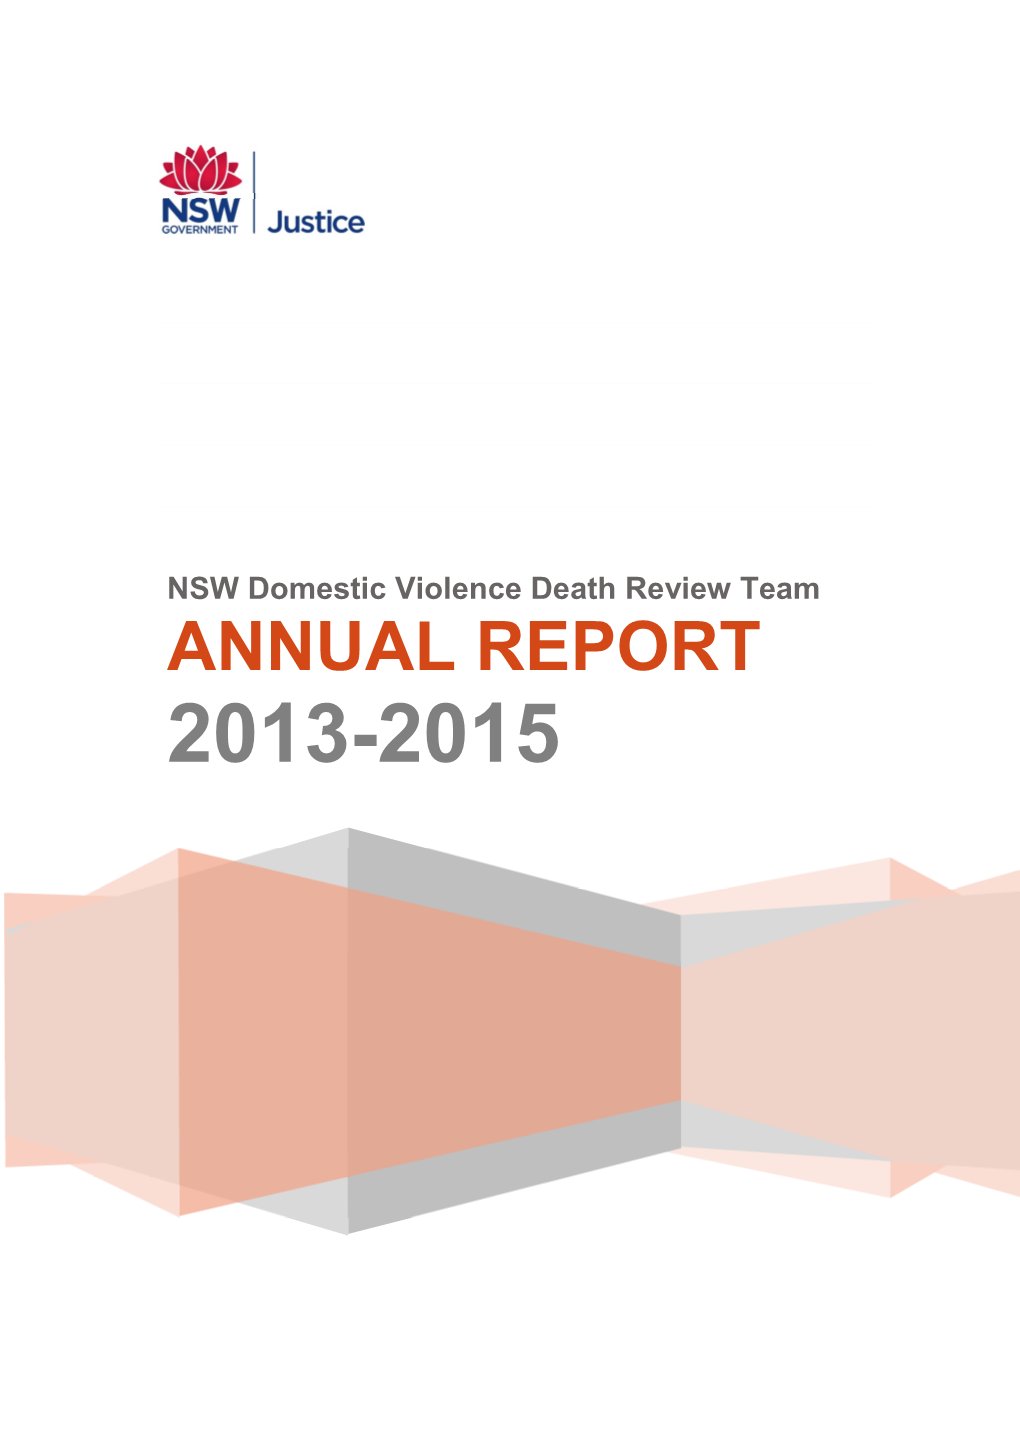 NSW Domestic Violence Death Review Team ANNUAL REPORT 2013-2015